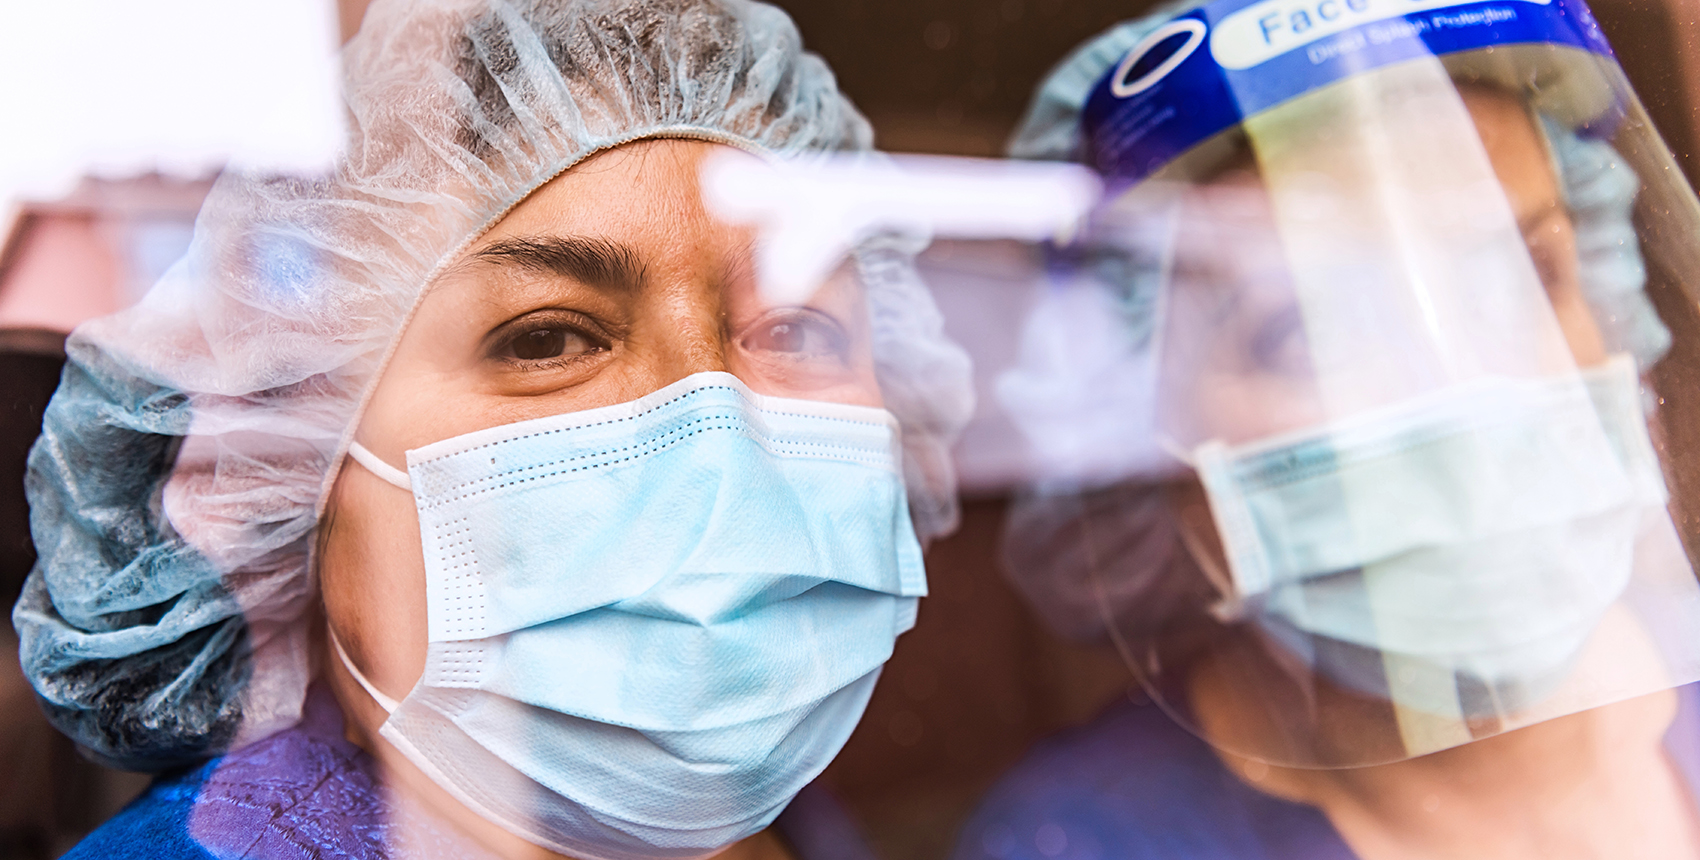 The faces of two people in medical scrubs, protective masks, and head gear seen through a reflection-covered window.